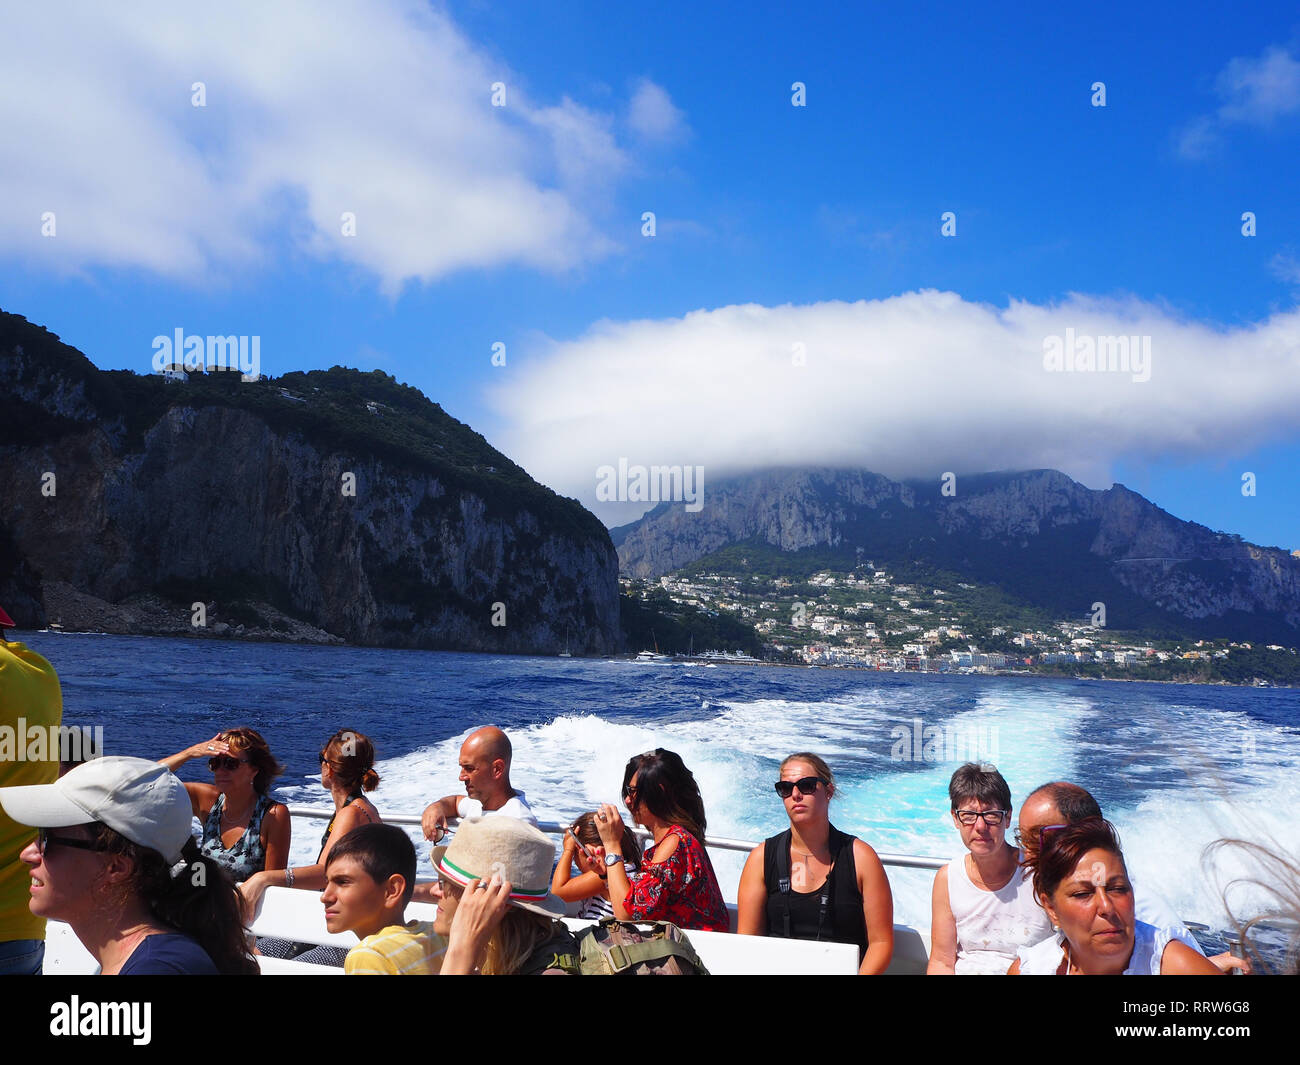 A View of Capri as a boat full of tourists makes its departure after a day trip from Ischia, Italy Stock Photo